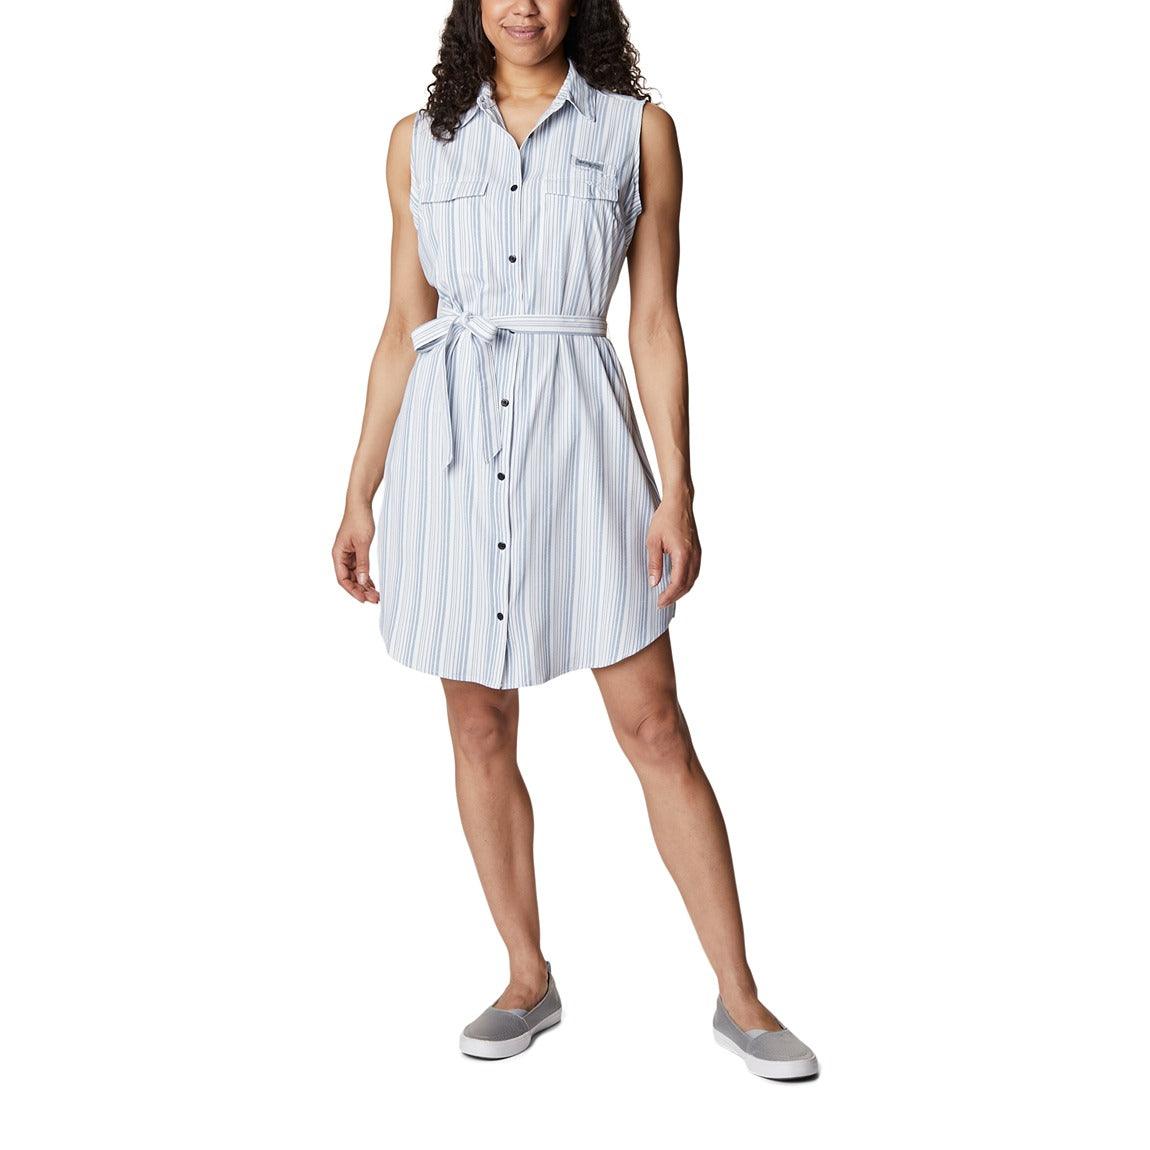 Anytime Casual™ III Dress - Plus Size – Sports Excellence